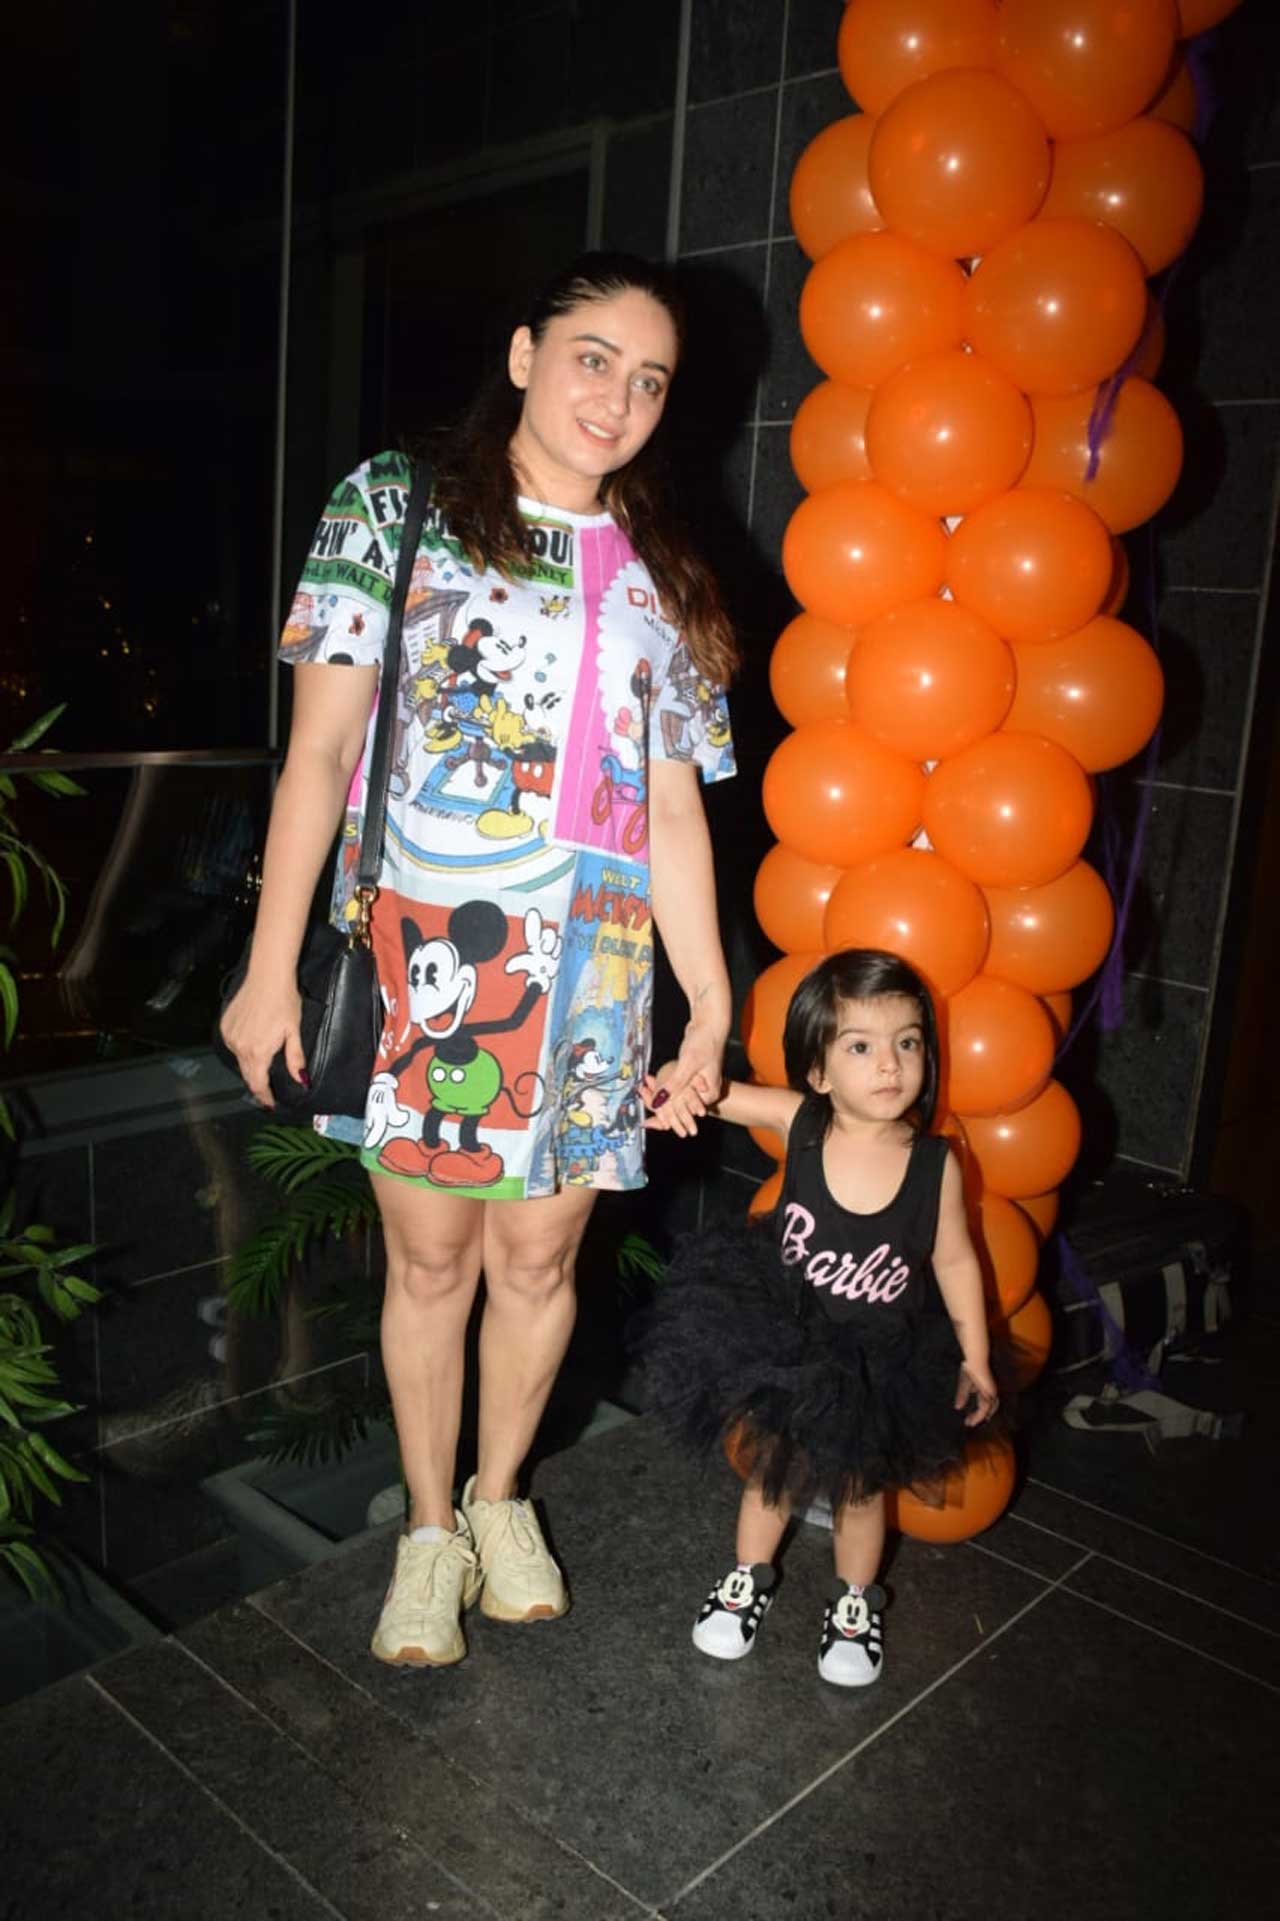 Mahhi Vij arrived with daughter Tara Bhanushali. Daddy Jay Bhanushali was missing as he is locked up in the Bigg Boss 15 house.